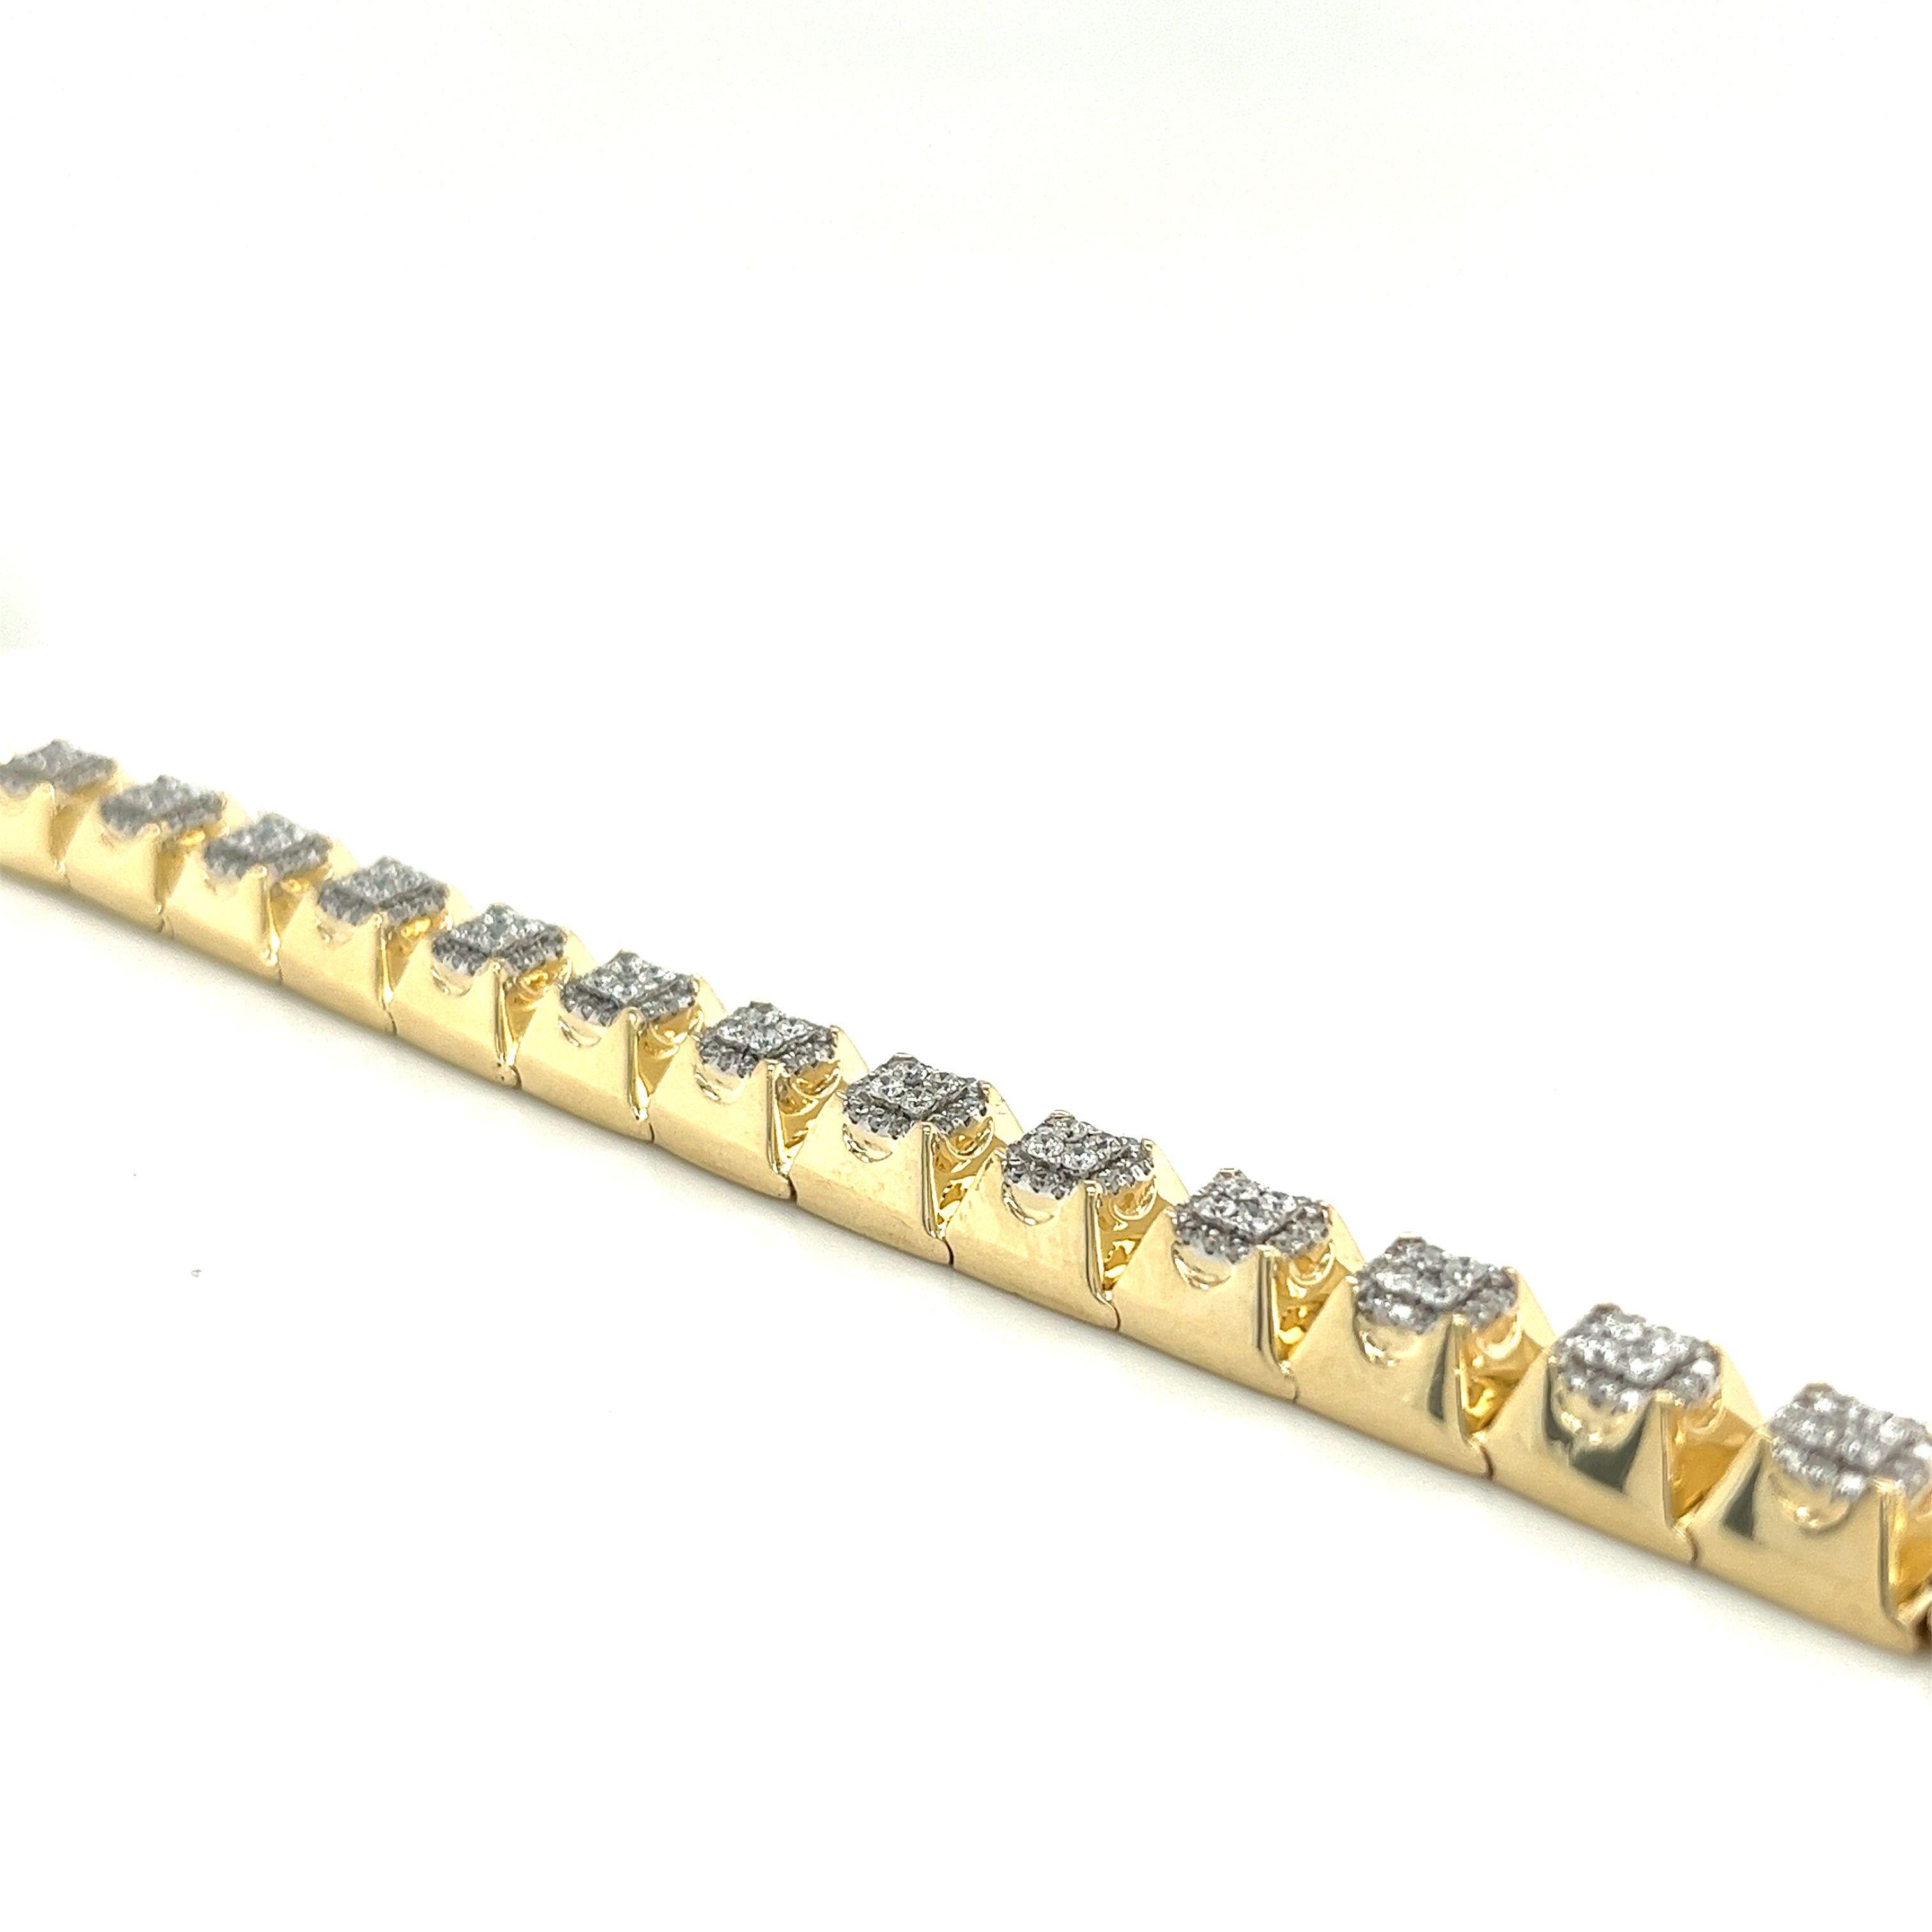 This gold bracelet is set in well-contrasted two-tone 14-karat gold. Genuine, 14k yellow gold. NOT Plated, NOT Filled, and NOT Overlayed. Professionally tested and stamped 14K. Extremely durable with a brand-new polished finish for long-lasting